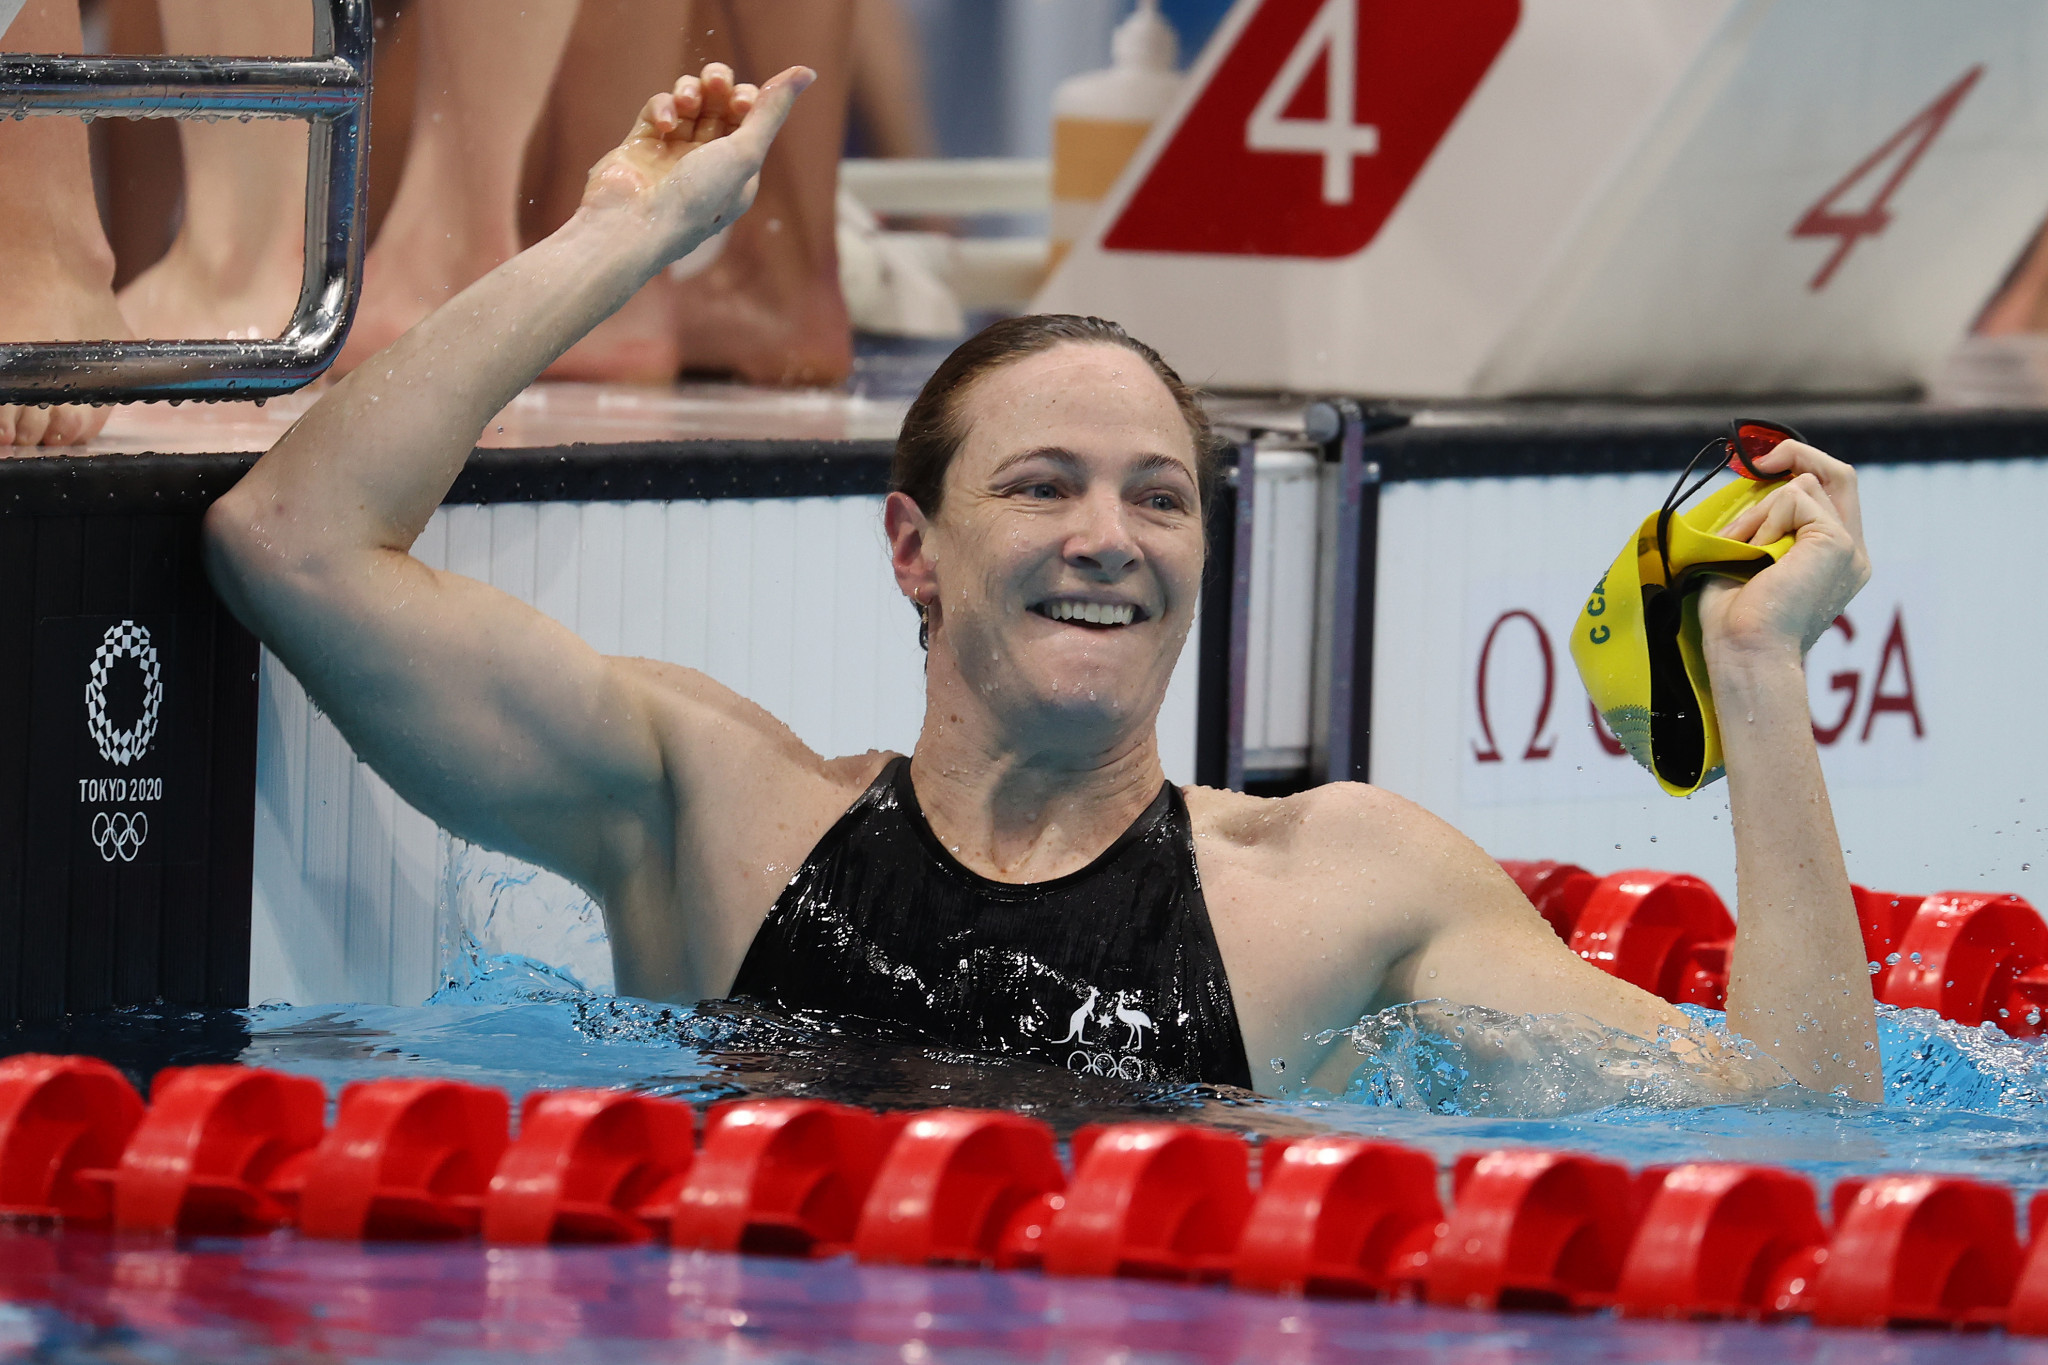 Six-time Commonwealth Games swimming gold medallist Campbell announces she will miss Birmingham 2022